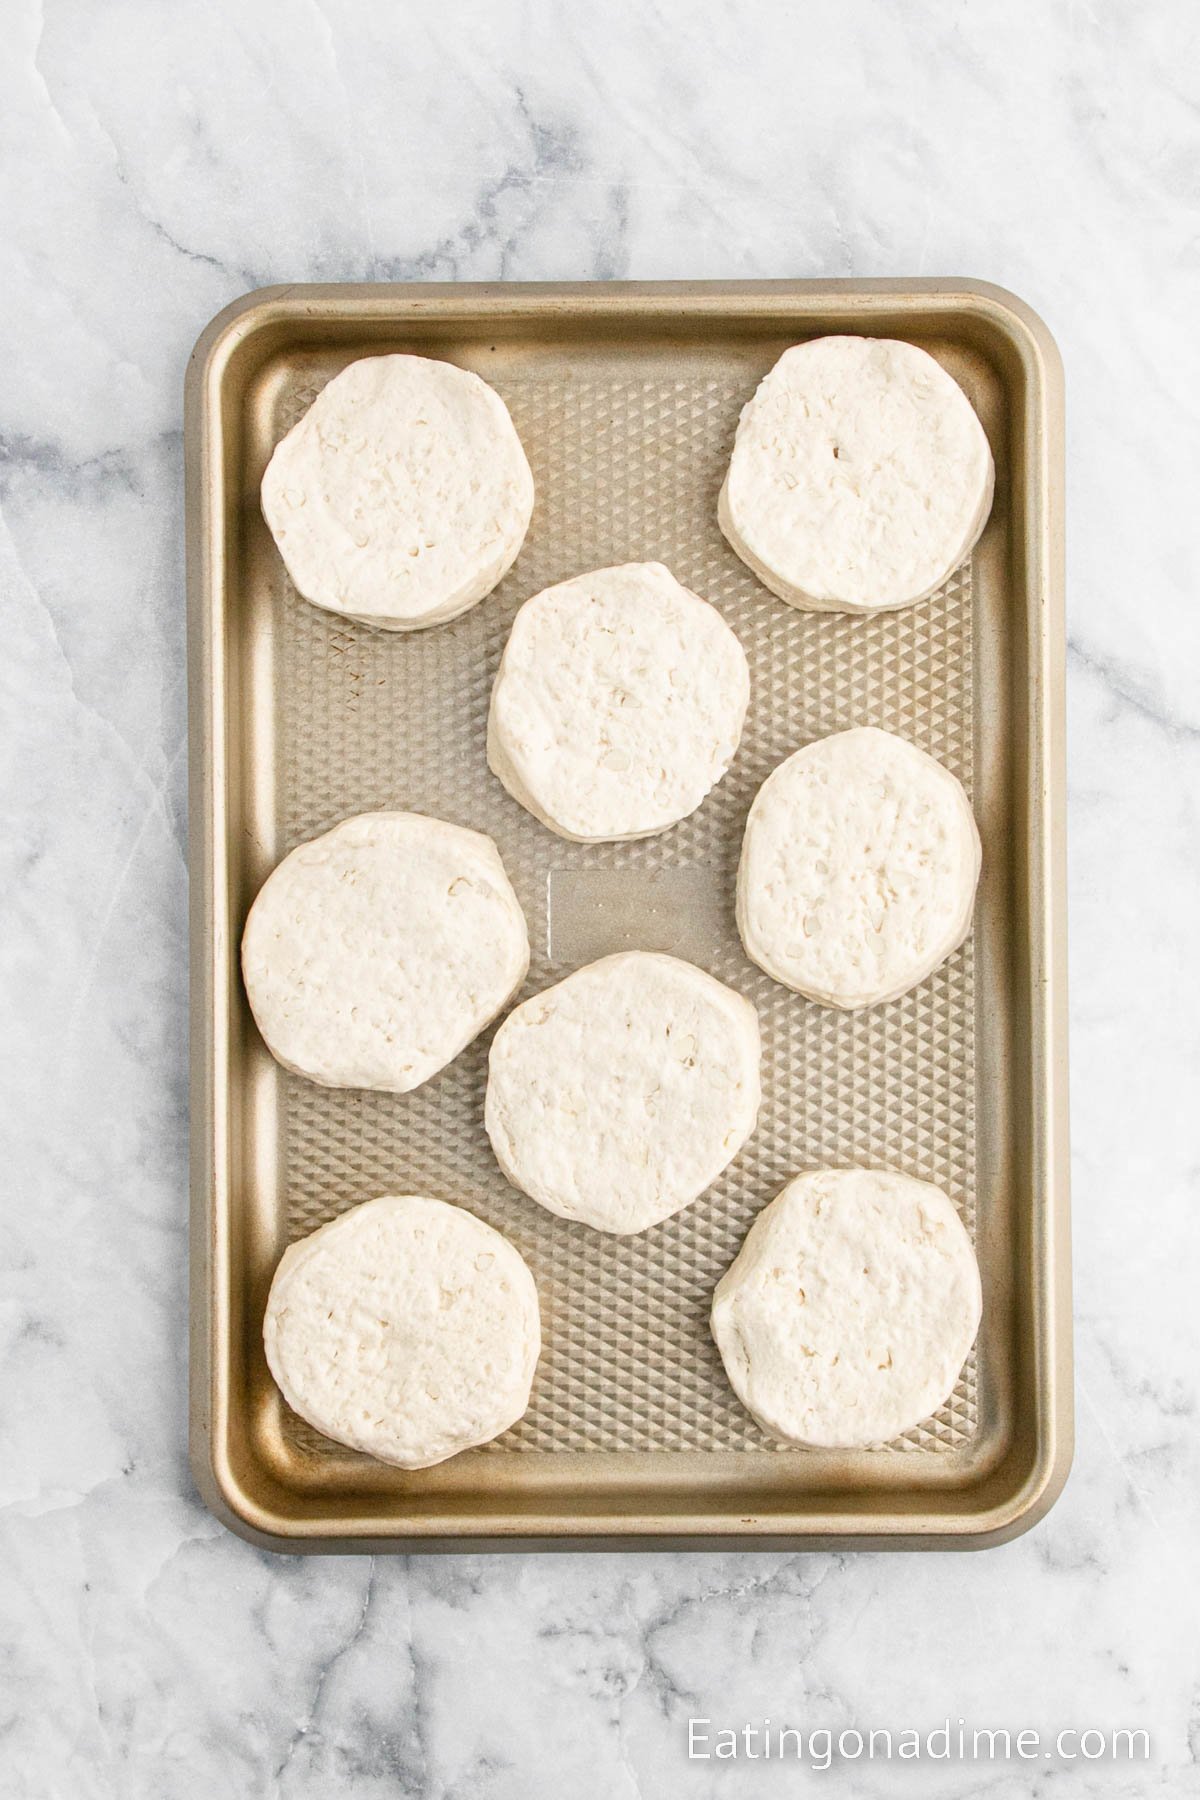 Biscuits on a baking sheet